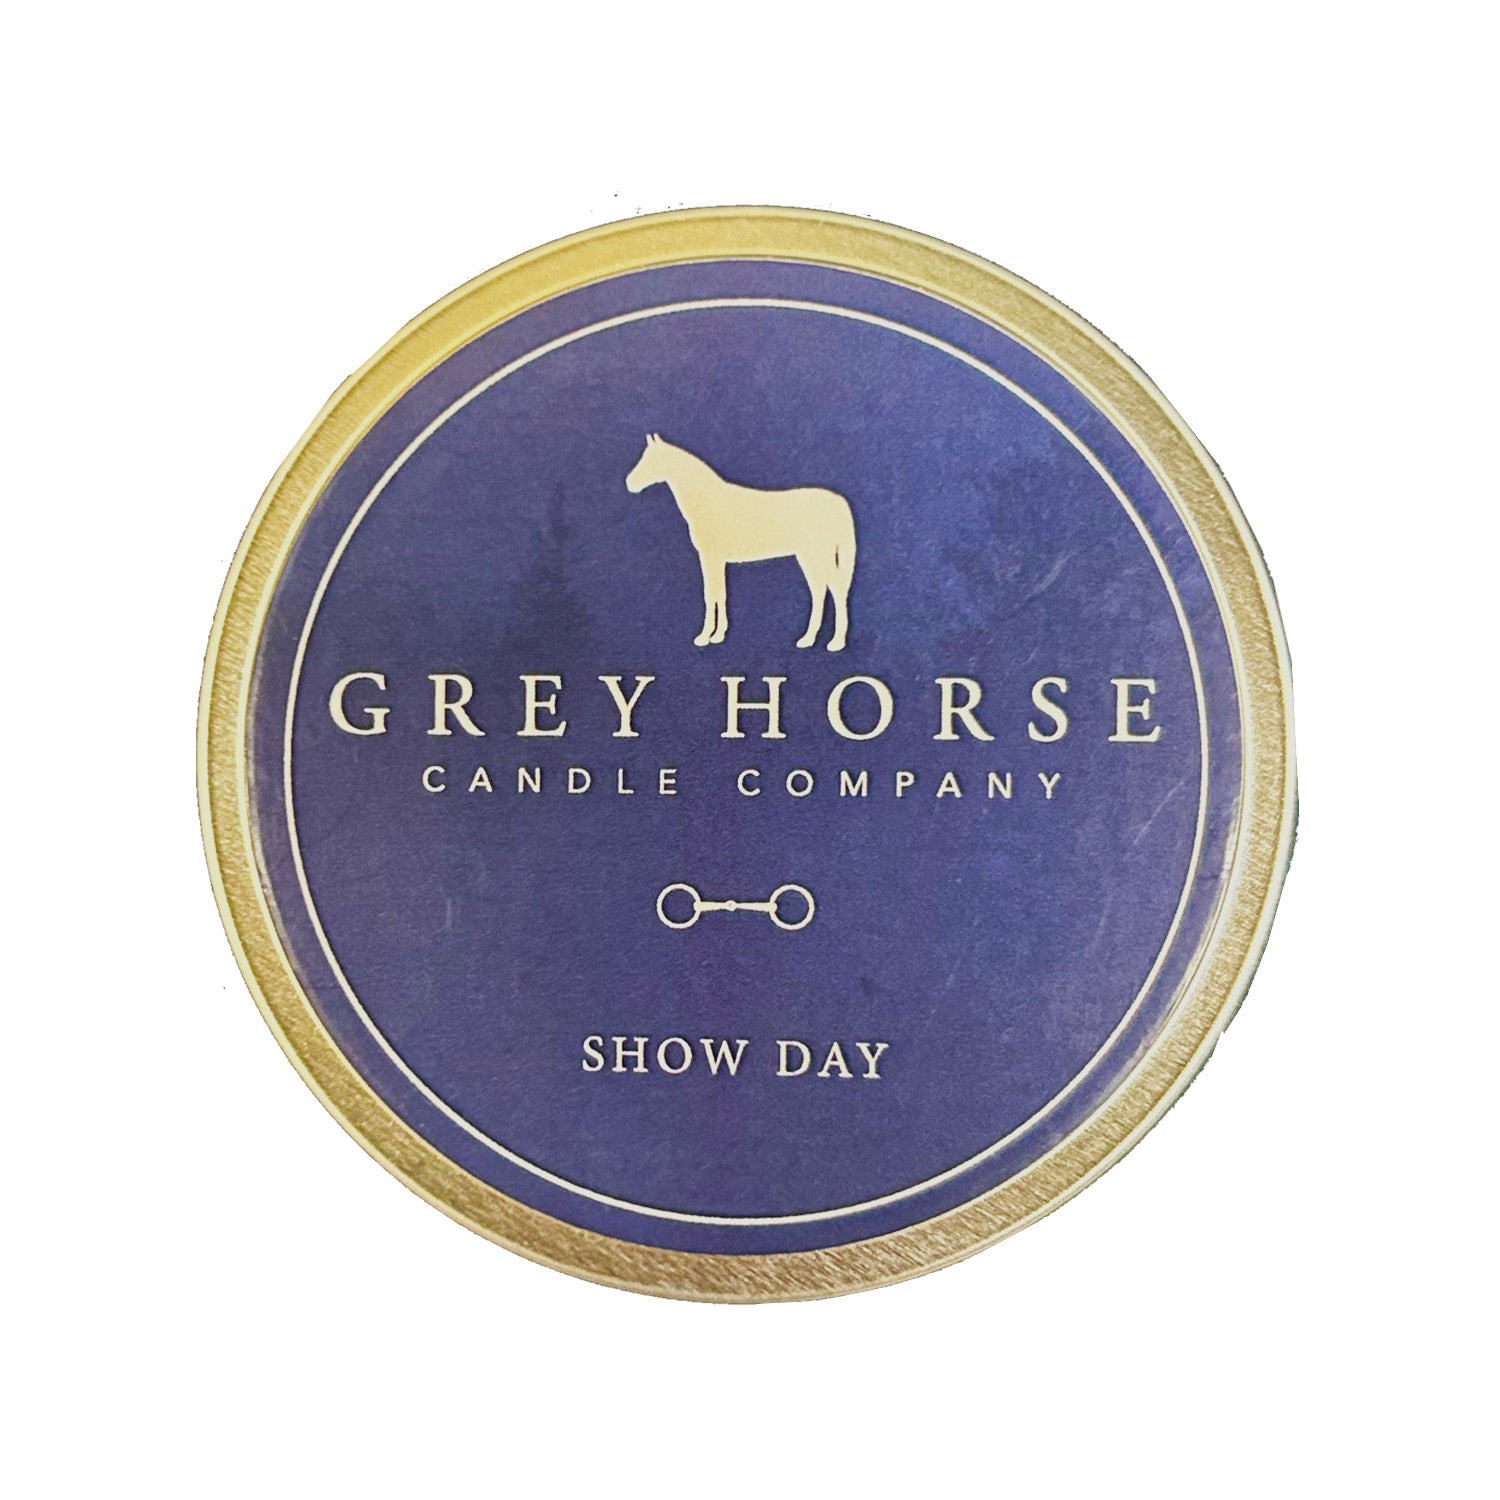 Grey Horse Soy Candle Tins